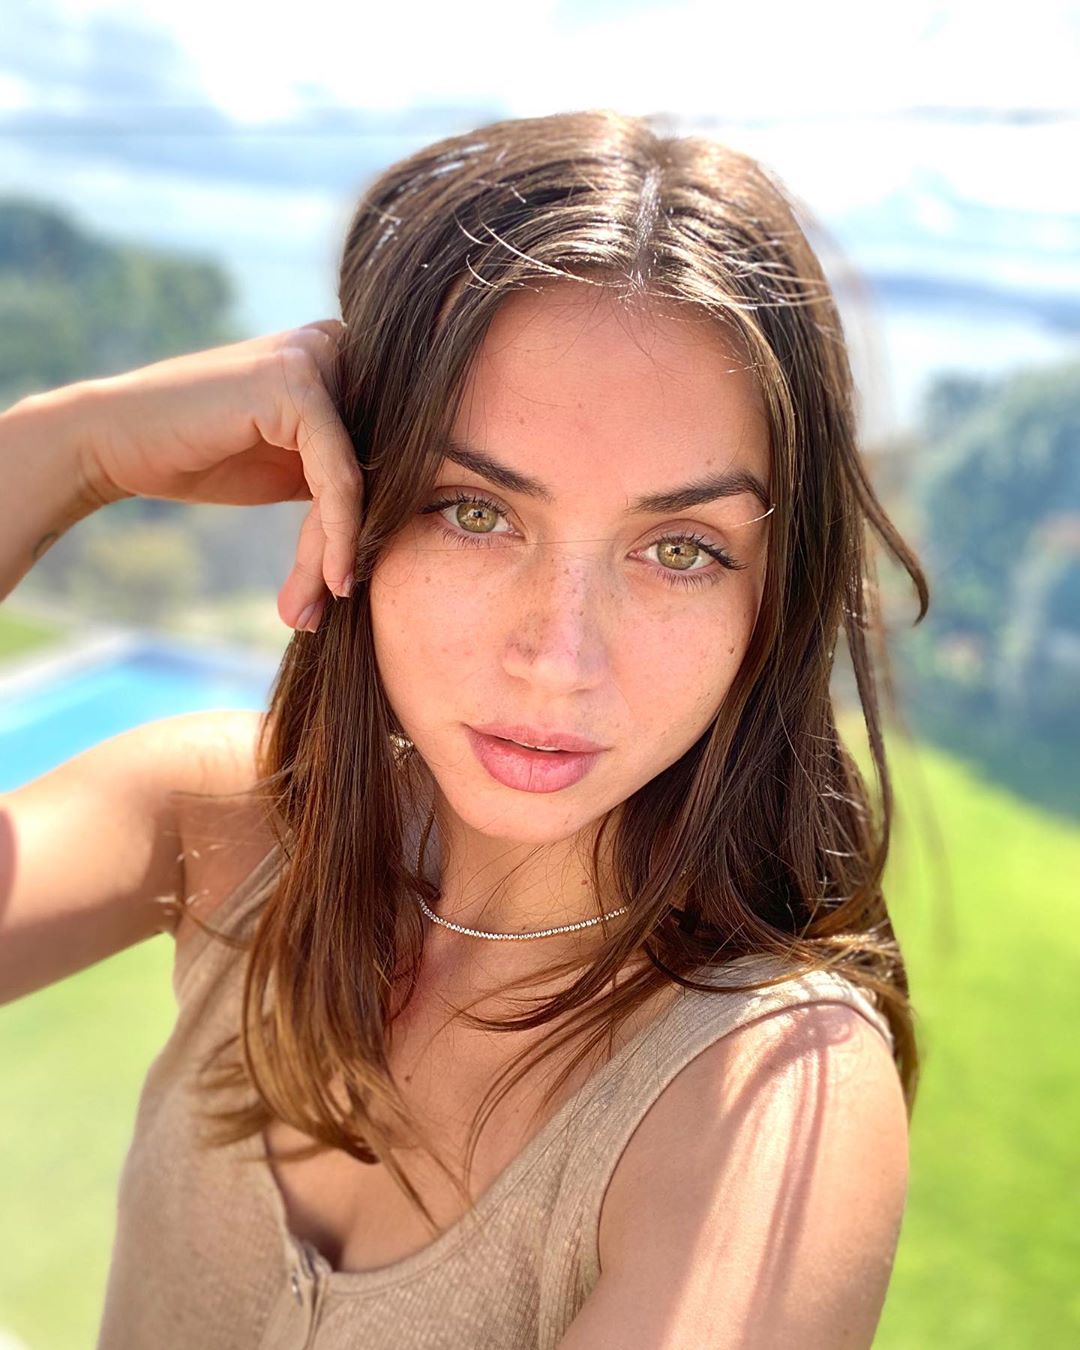 Let's all get together and jerk for Ana de Armas